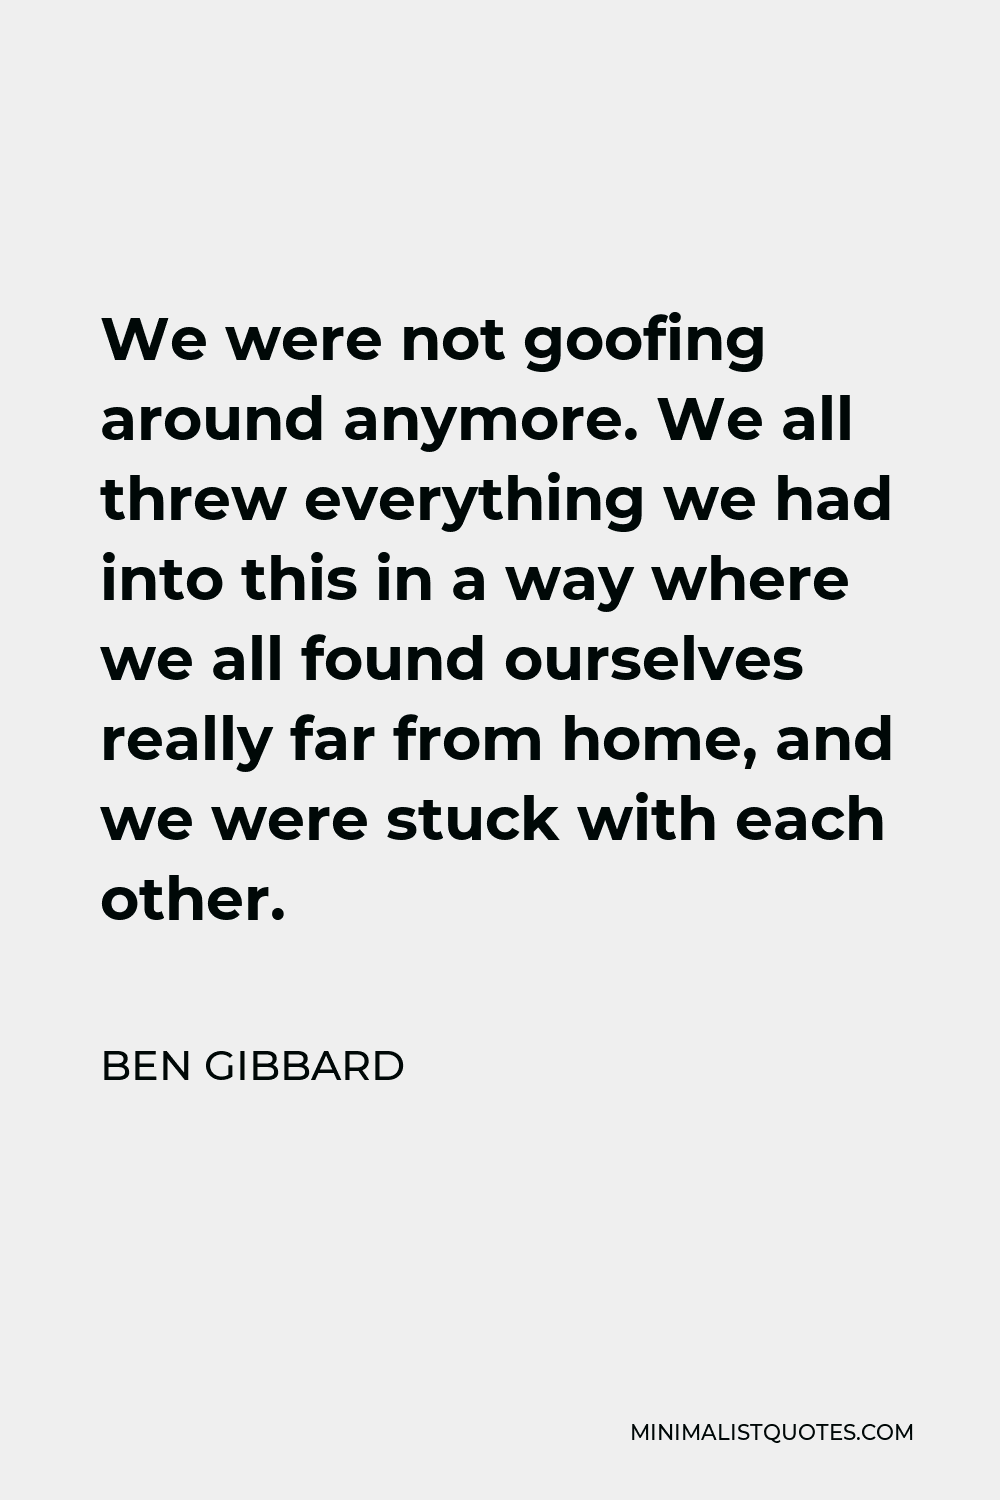 Ben Gibbard Quote - We were not goofing around anymore. We all threw everything we had into this in a way where we all found ourselves really far from home, and we were stuck with each other.